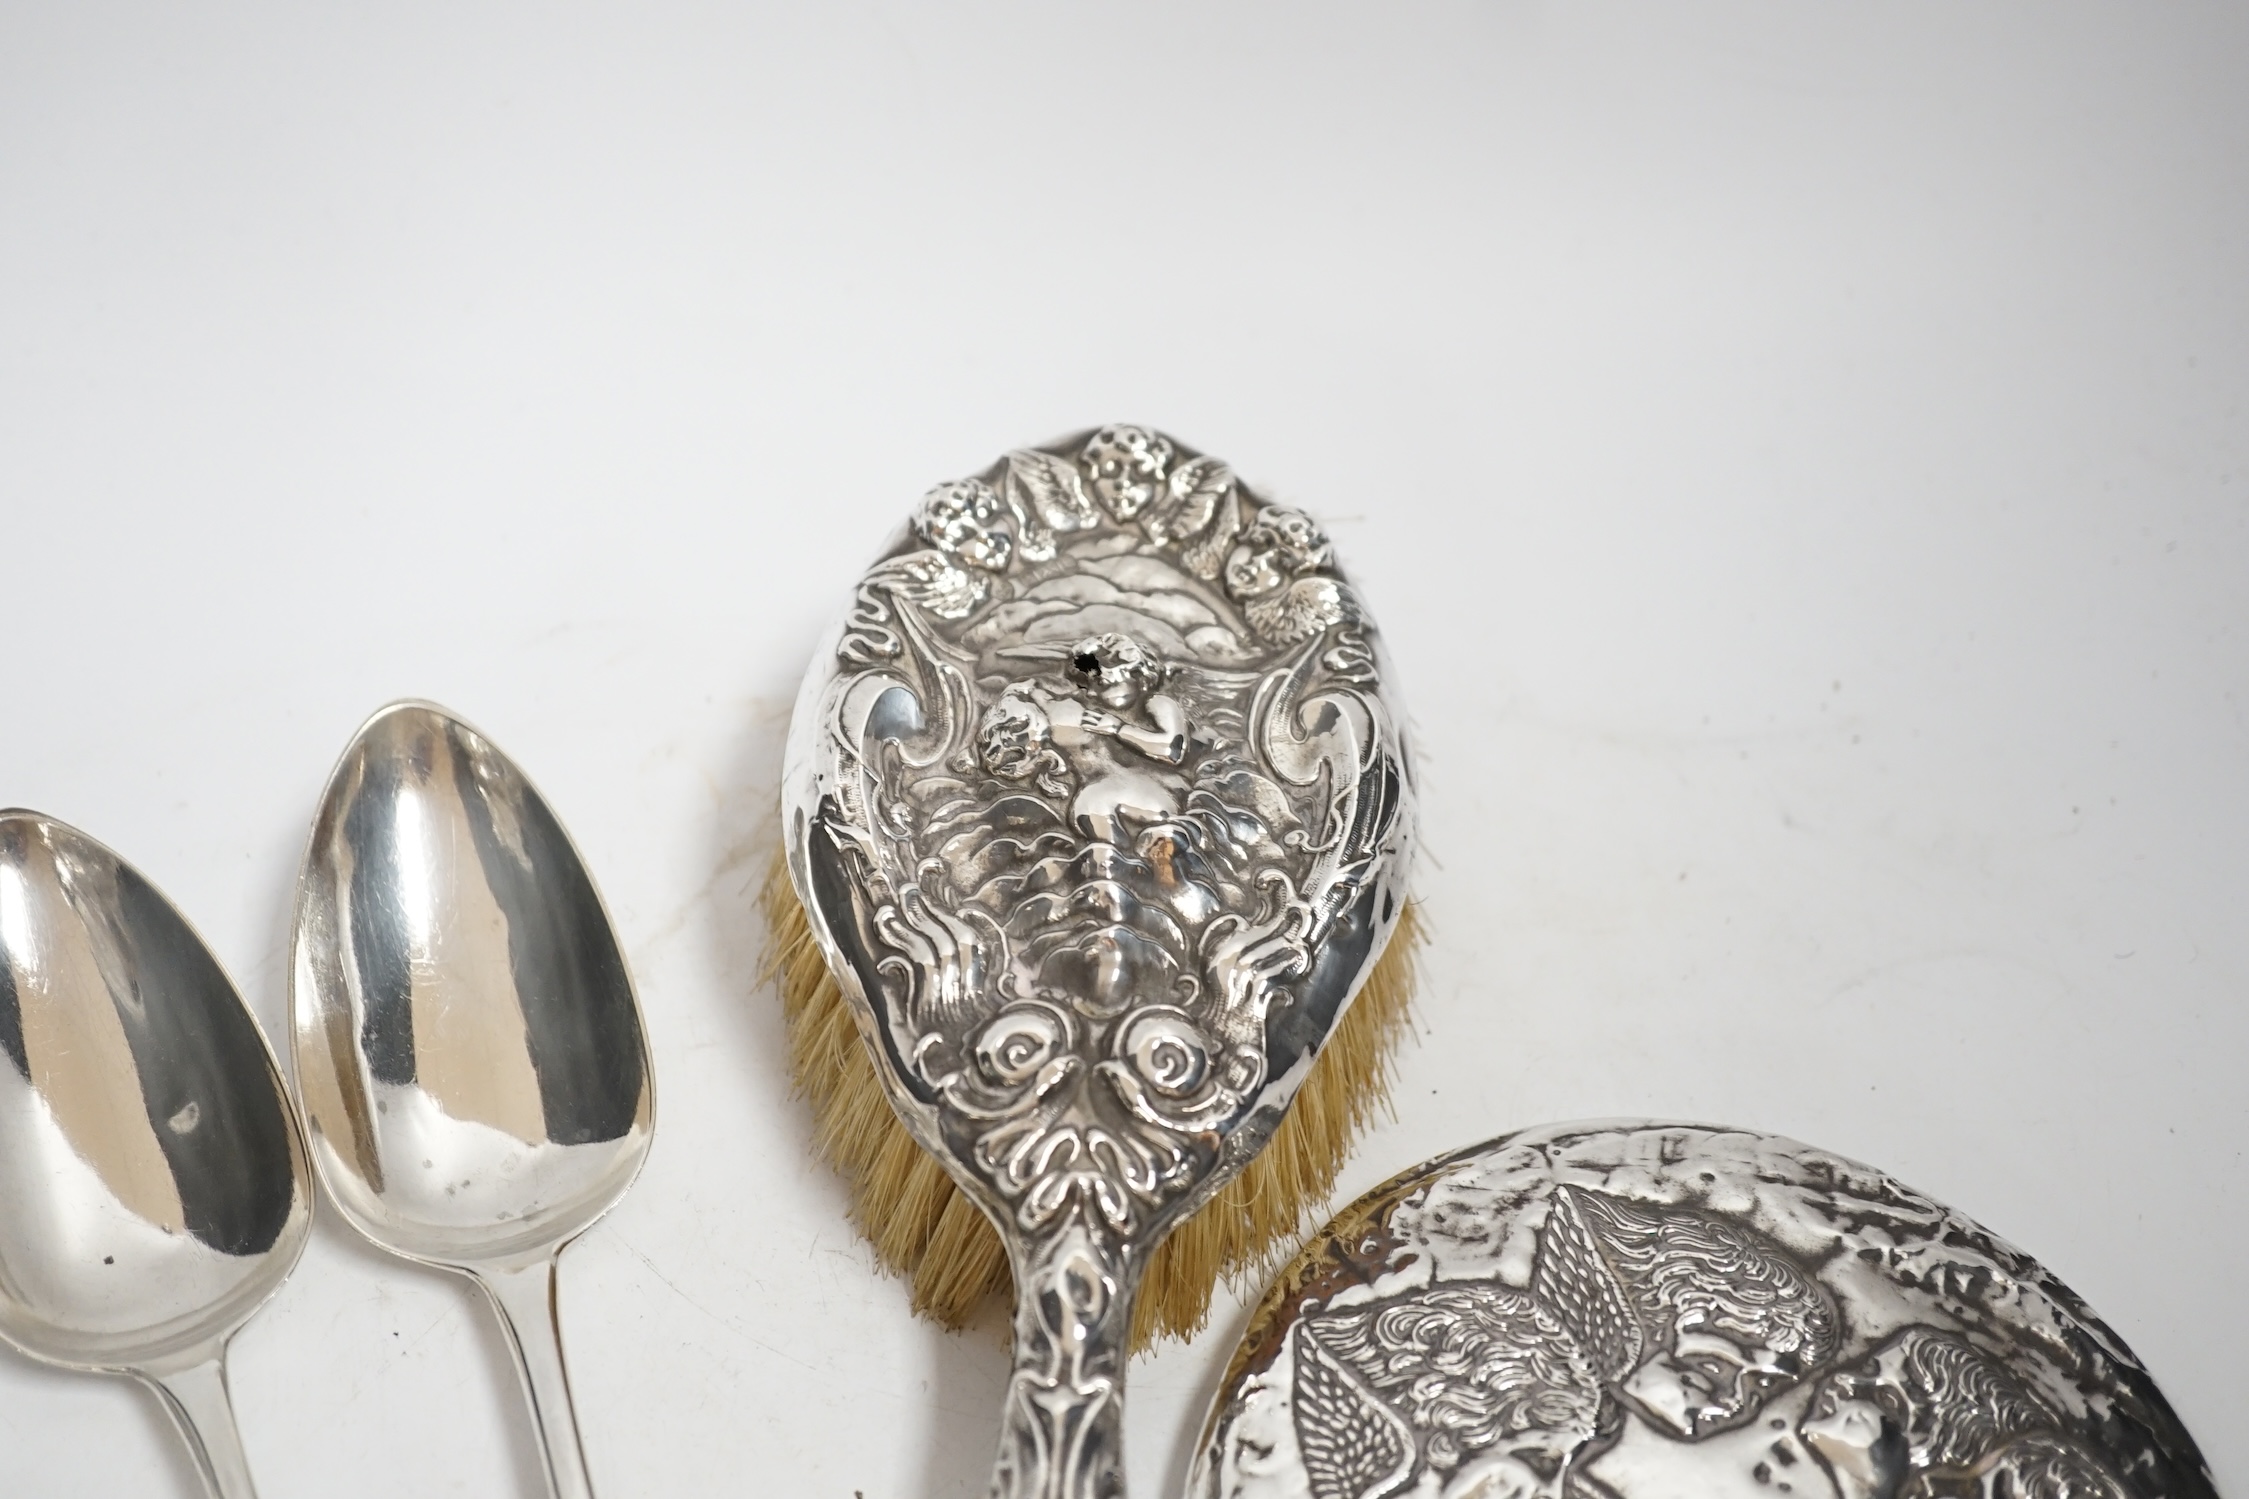 Sundry silver including a pair of George III silver Old English pattern table spoons, by Peter & William Bateman, a novelty silver ring-holder modelled as a scarecrow, a pair of grape shears, cockerel seal, small Mr. Pun